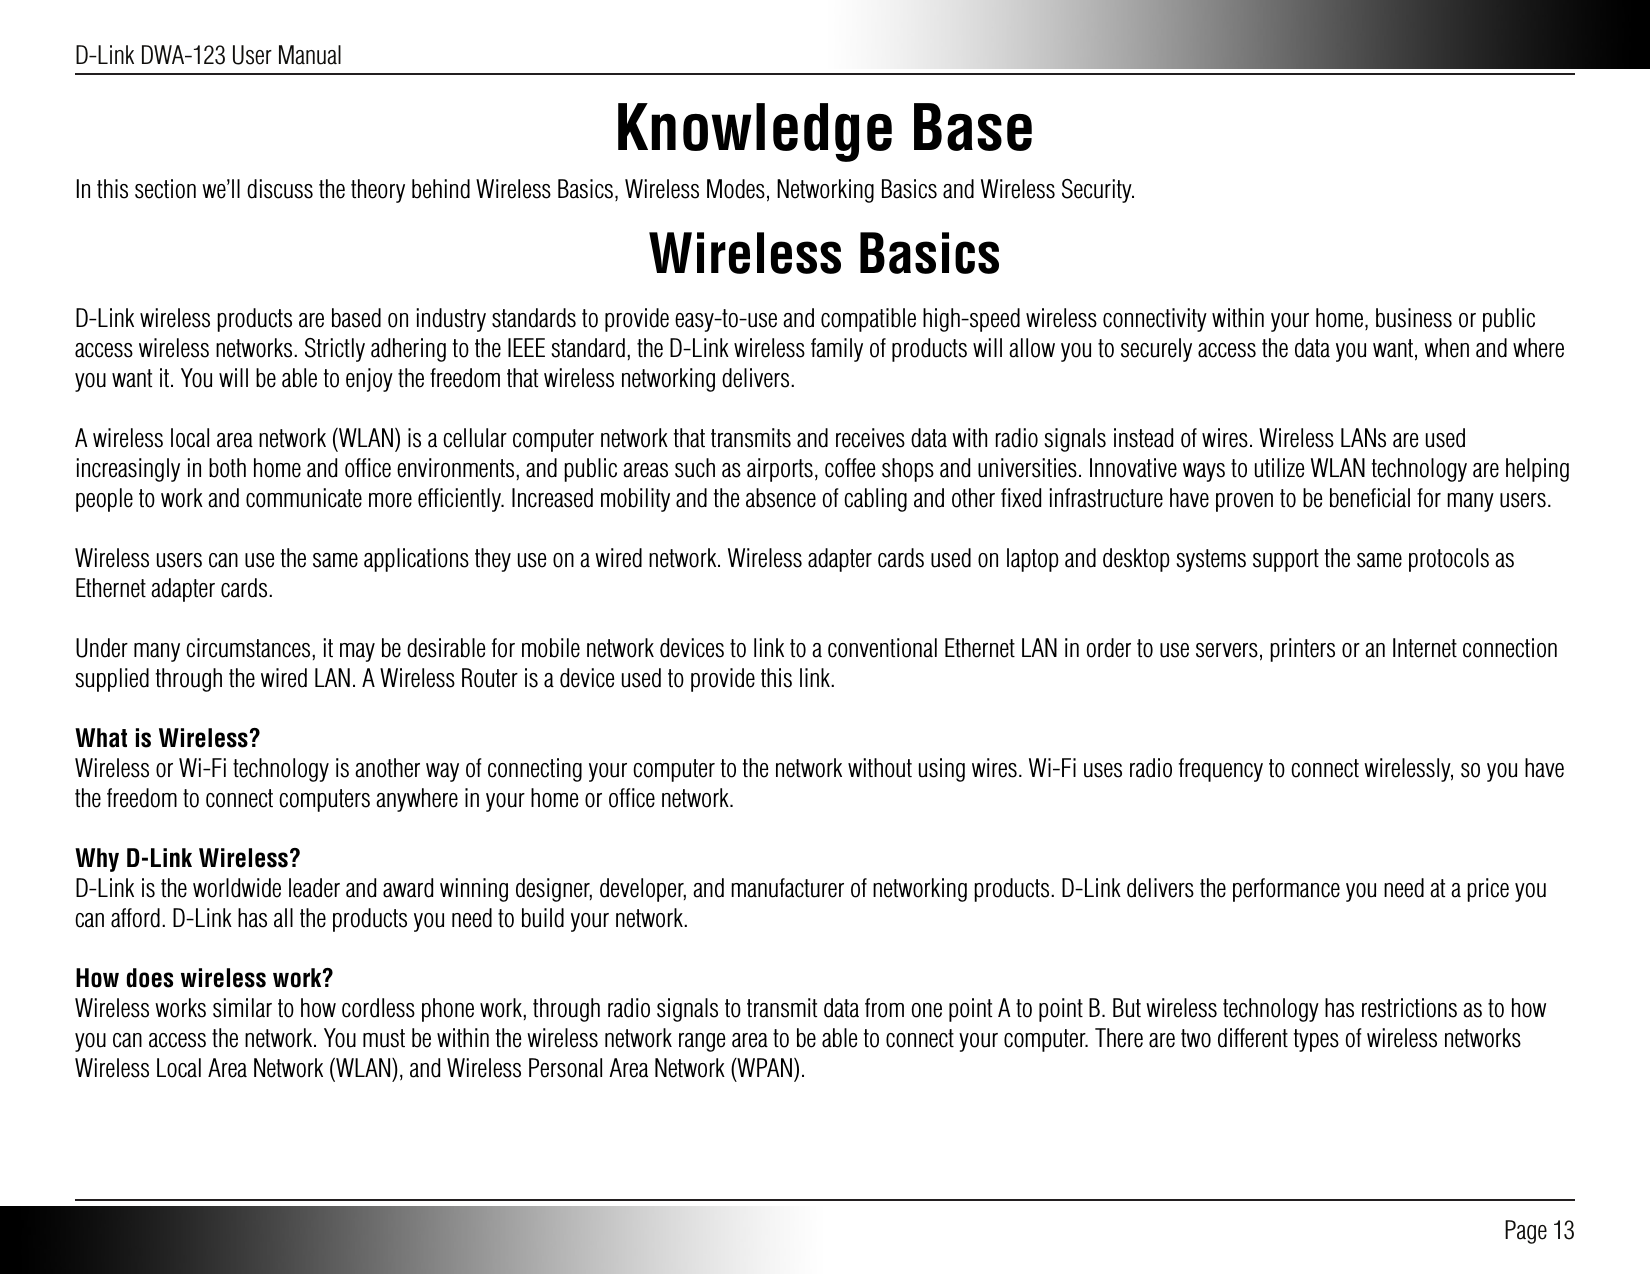 D-Link DWA-123 User Manual Page 13Knowledge BaseIn this section we’ll discuss the theory behind Wireless Basics, Wireless Modes, Networking Basics and Wireless Security.Wireless BasicsD-Link wireless products are based on industry standards to provide easy-to-use and compatible high-speed wireless connectivity within your home, business or public access wireless networks. Strictly adhering to the IEEE standard, the D-Link wireless family of products will allow you to securely access the data you want, when and where you want it. You will be able to enjoy the freedom that wireless networking delivers.A wireless local area network (WLAN) is a cellular computer network that transmits and receives data with radio signals instead of wires. Wireless LANs are used increasingly in both home and ofﬁce environments, and public areas such as airports, coffee shops and universities. Innovative ways to utilize WLAN technology are helping people to work and communicate more efﬁciently. Increased mobility and the absence of cabling and other ﬁxed infrastructure have proven to be beneﬁcial for many users.Wireless users can use the same applications they use on a wired network. Wireless adapter cards used on laptop and desktop systems support the same protocols as Ethernet adapter cards. Under many circumstances, it may be desirable for mobile network devices to link to a conventional Ethernet LAN in order to use servers, printers or an Internet connection supplied through the wired LAN. A Wireless Router is a device used to provide this link.What is Wireless?Wireless or Wi-Fi technology is another way of connecting your computer to the network without using wires. Wi-Fi uses radio frequency to connect wirelessly, so you have the freedom to connect computers anywhere in your home or ofﬁce network.Why D-Link Wireless?D-Link is the worldwide leader and award winning designer, developer, and manufacturer of networking products. D-Link delivers the performance you need at a price you can afford. D-Link has all the products you need to build your network.How does wireless work?Wireless works similar to how cordless phone work, through radio signals to transmit data from one point A to point B. But wireless technology has restrictions as to how you can access the network. You must be within the wireless network range area to be able to connect your computer. There are two different types of wireless networks Wireless Local Area Network (WLAN), and Wireless Personal Area Network (WPAN).